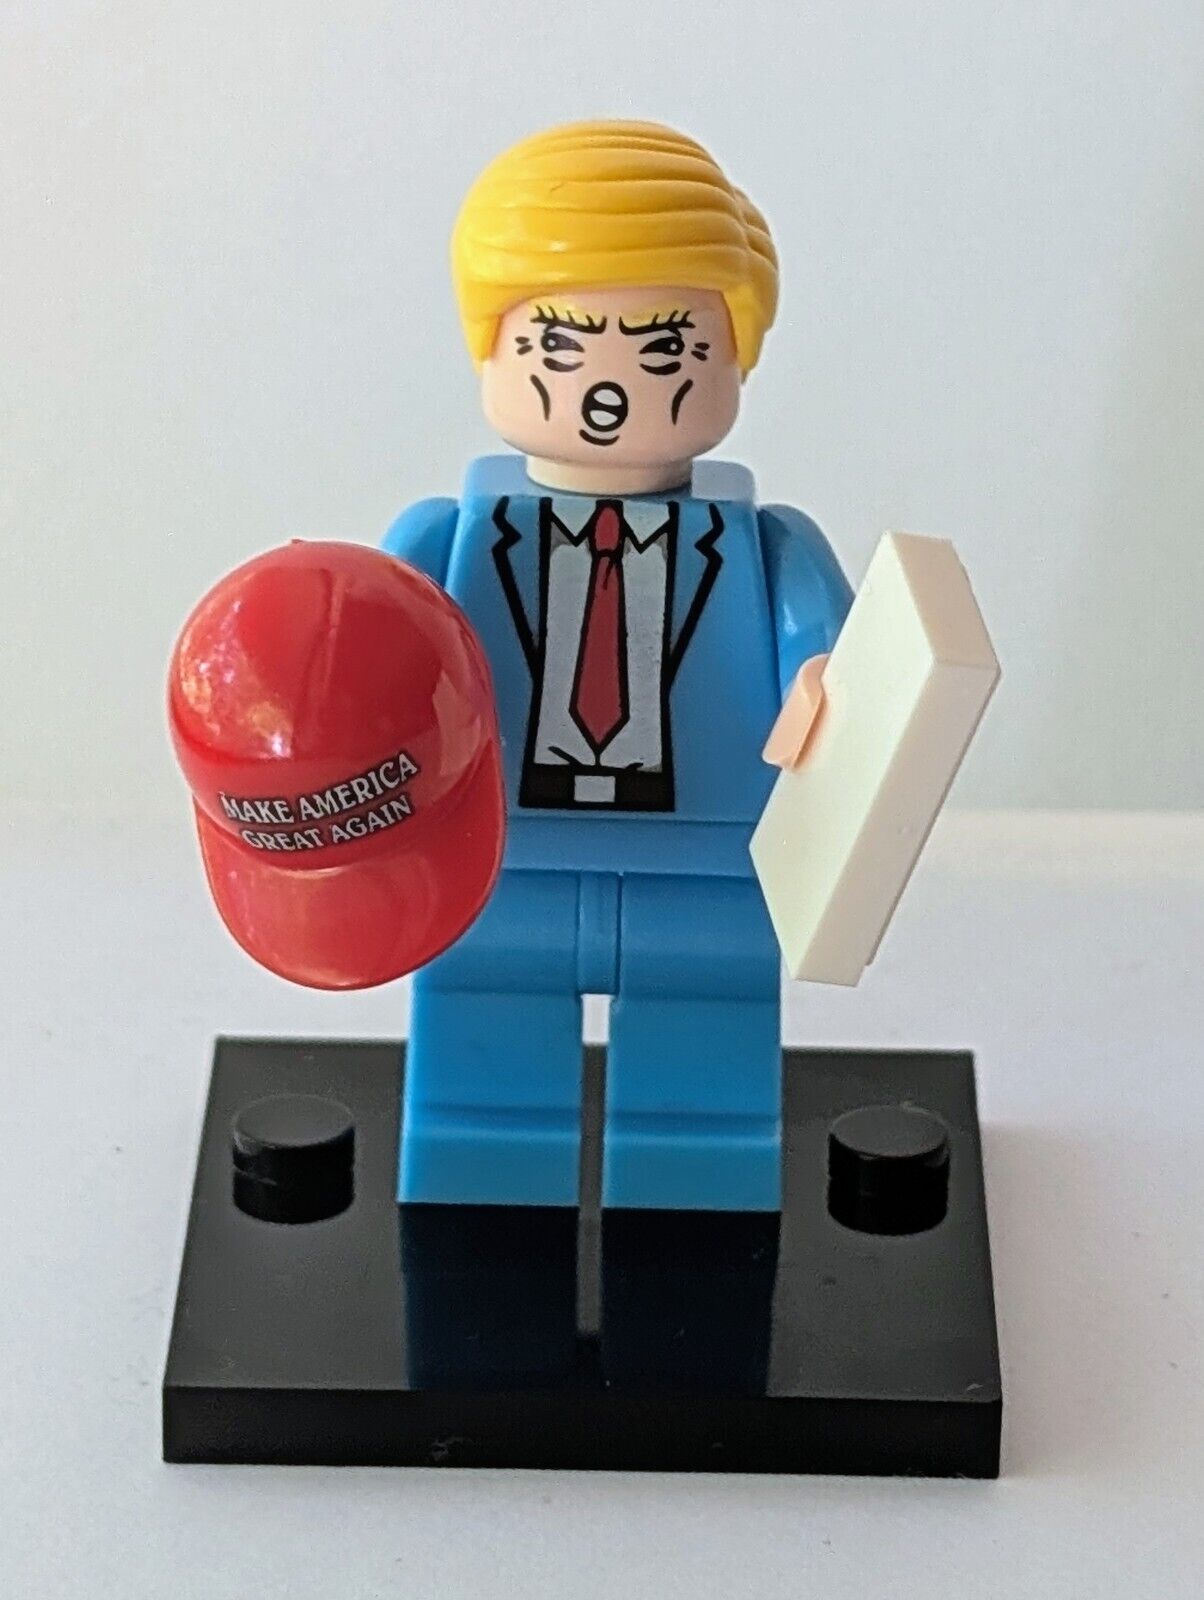 BRAND NEW President Donald Trump Lego Minifigure With MAGA Hat - US SELLER